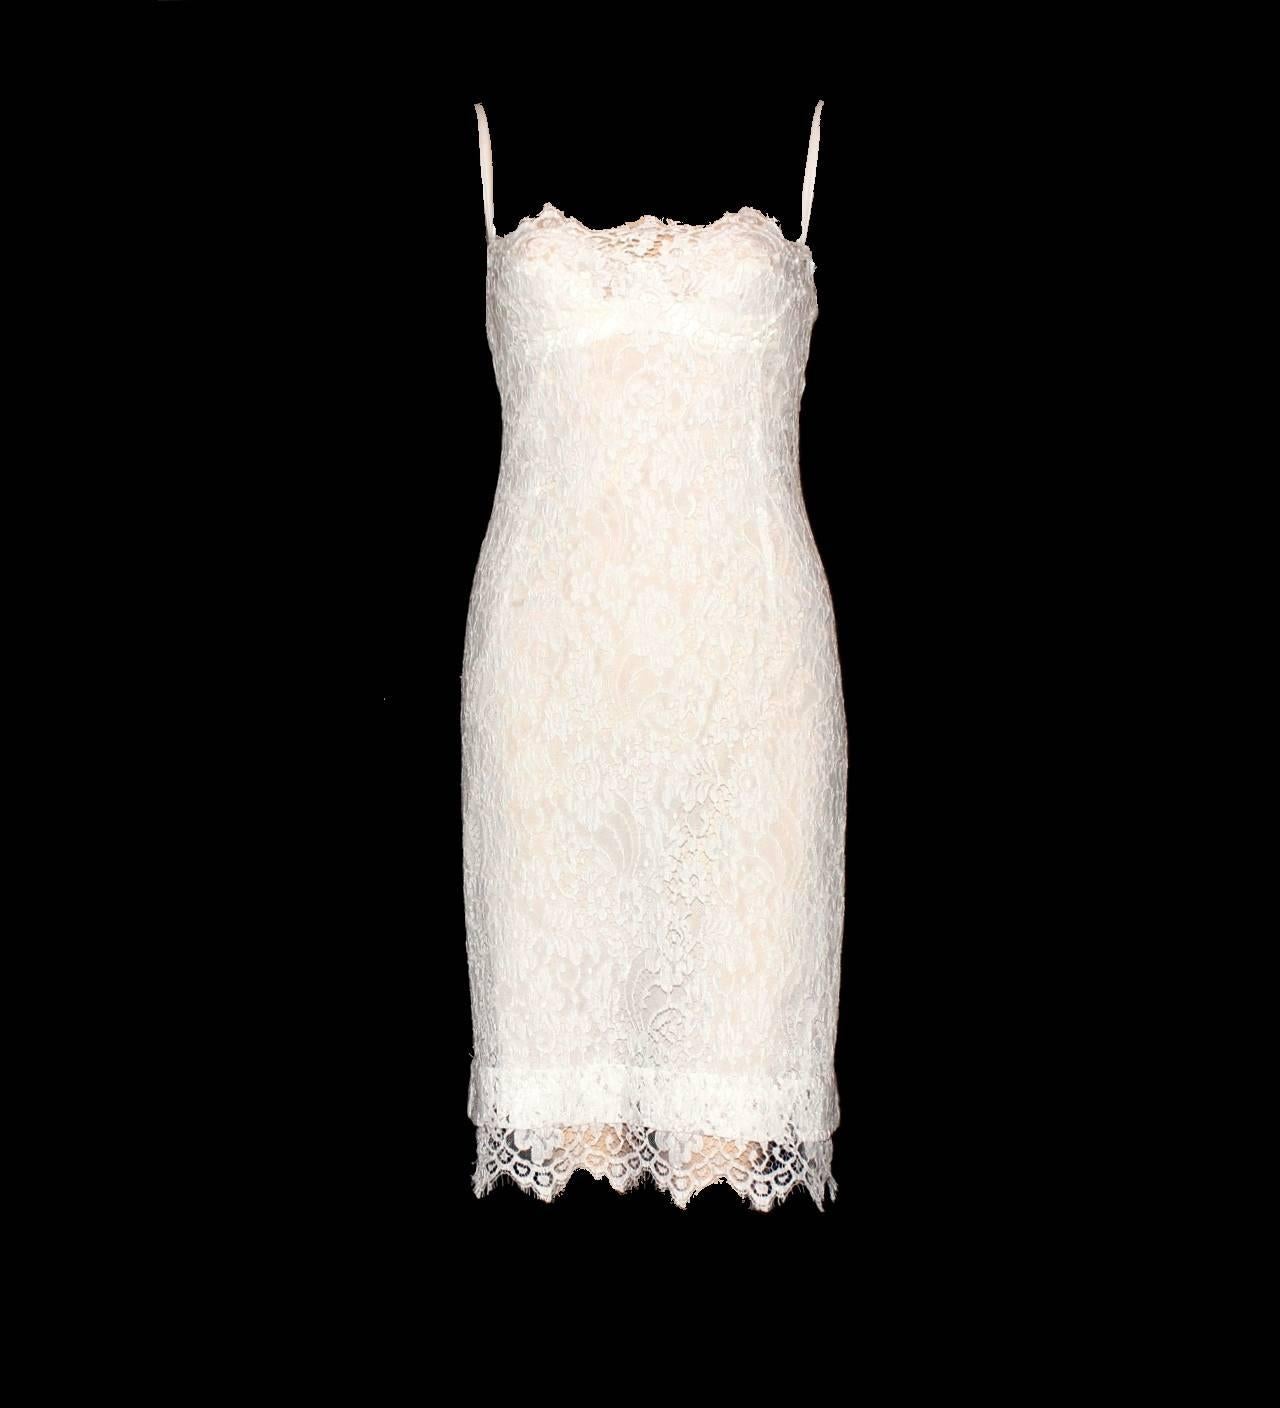     A DOLCE & GABBANA classic signature piece that will last you for years
    Dress made out of finest lace
    Scalloped edges
    Zipper in the back
    Comes with attached bra-slip dress
    Neckholder details
    Dry clean only
    Made in